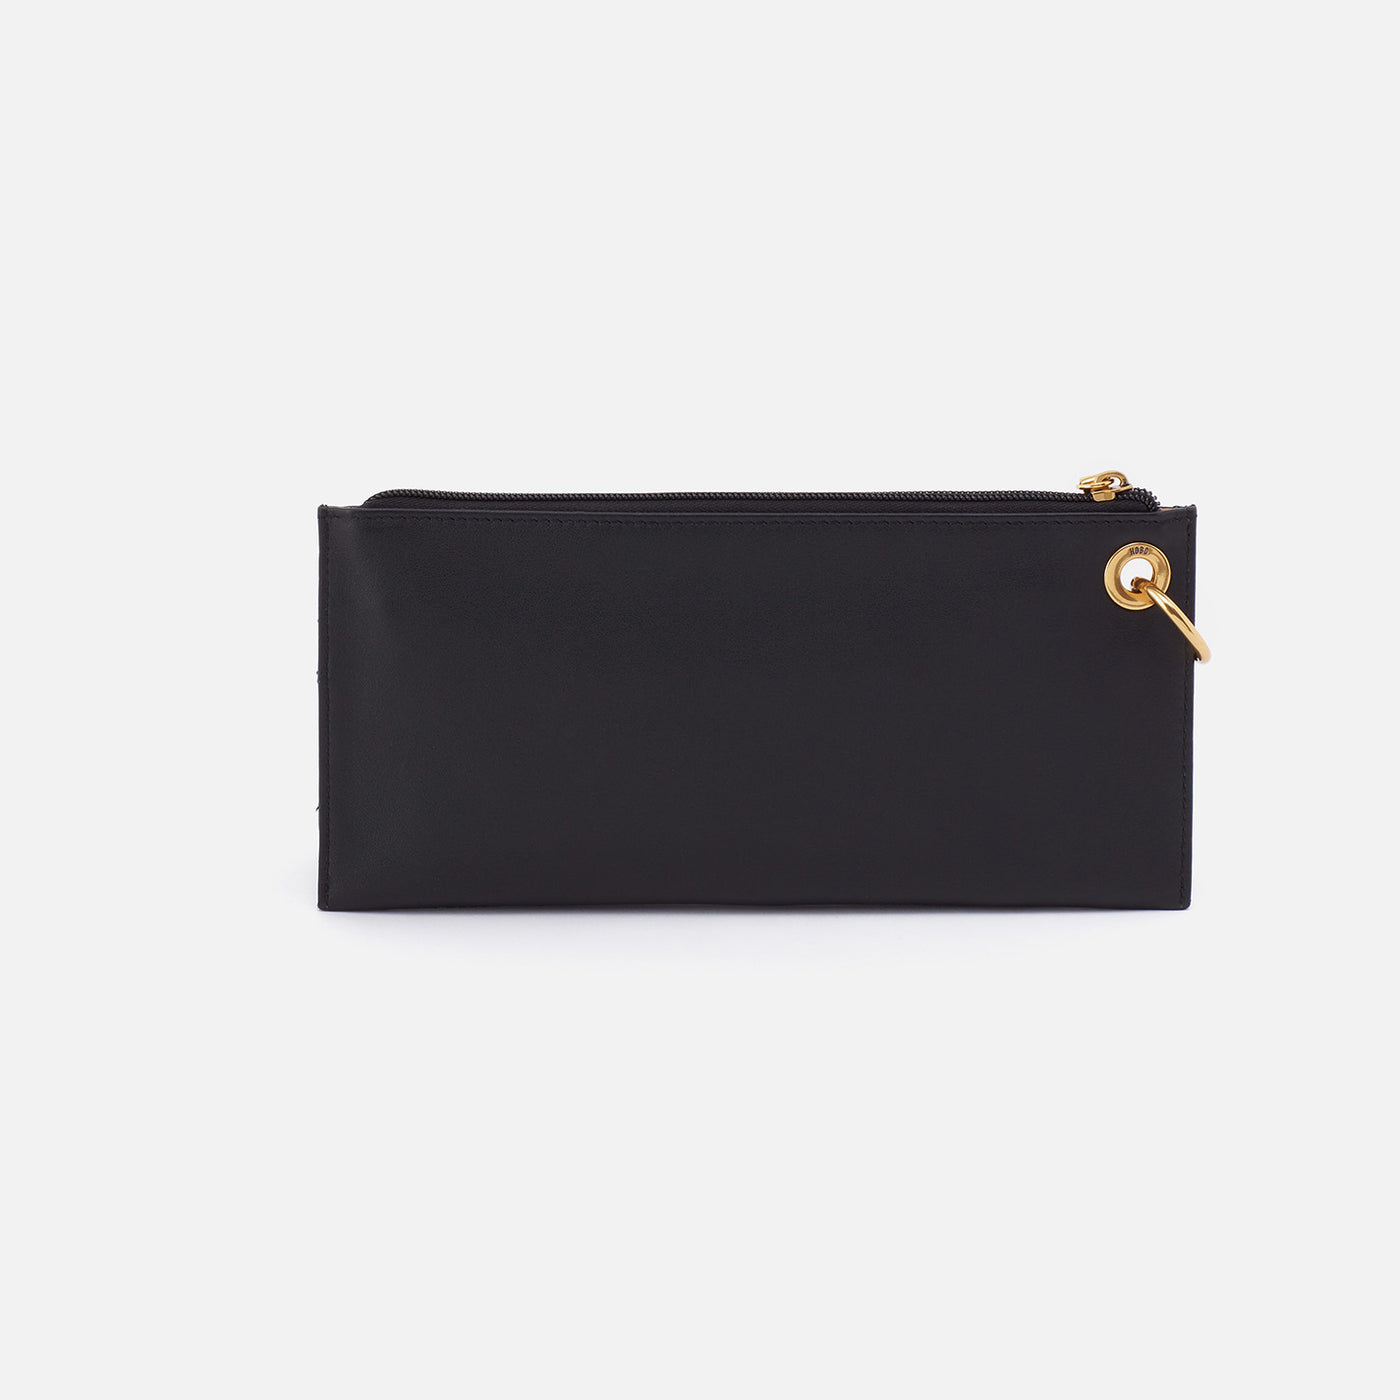 Vida Wristlet in Quilted Silk Napa Leather - Black